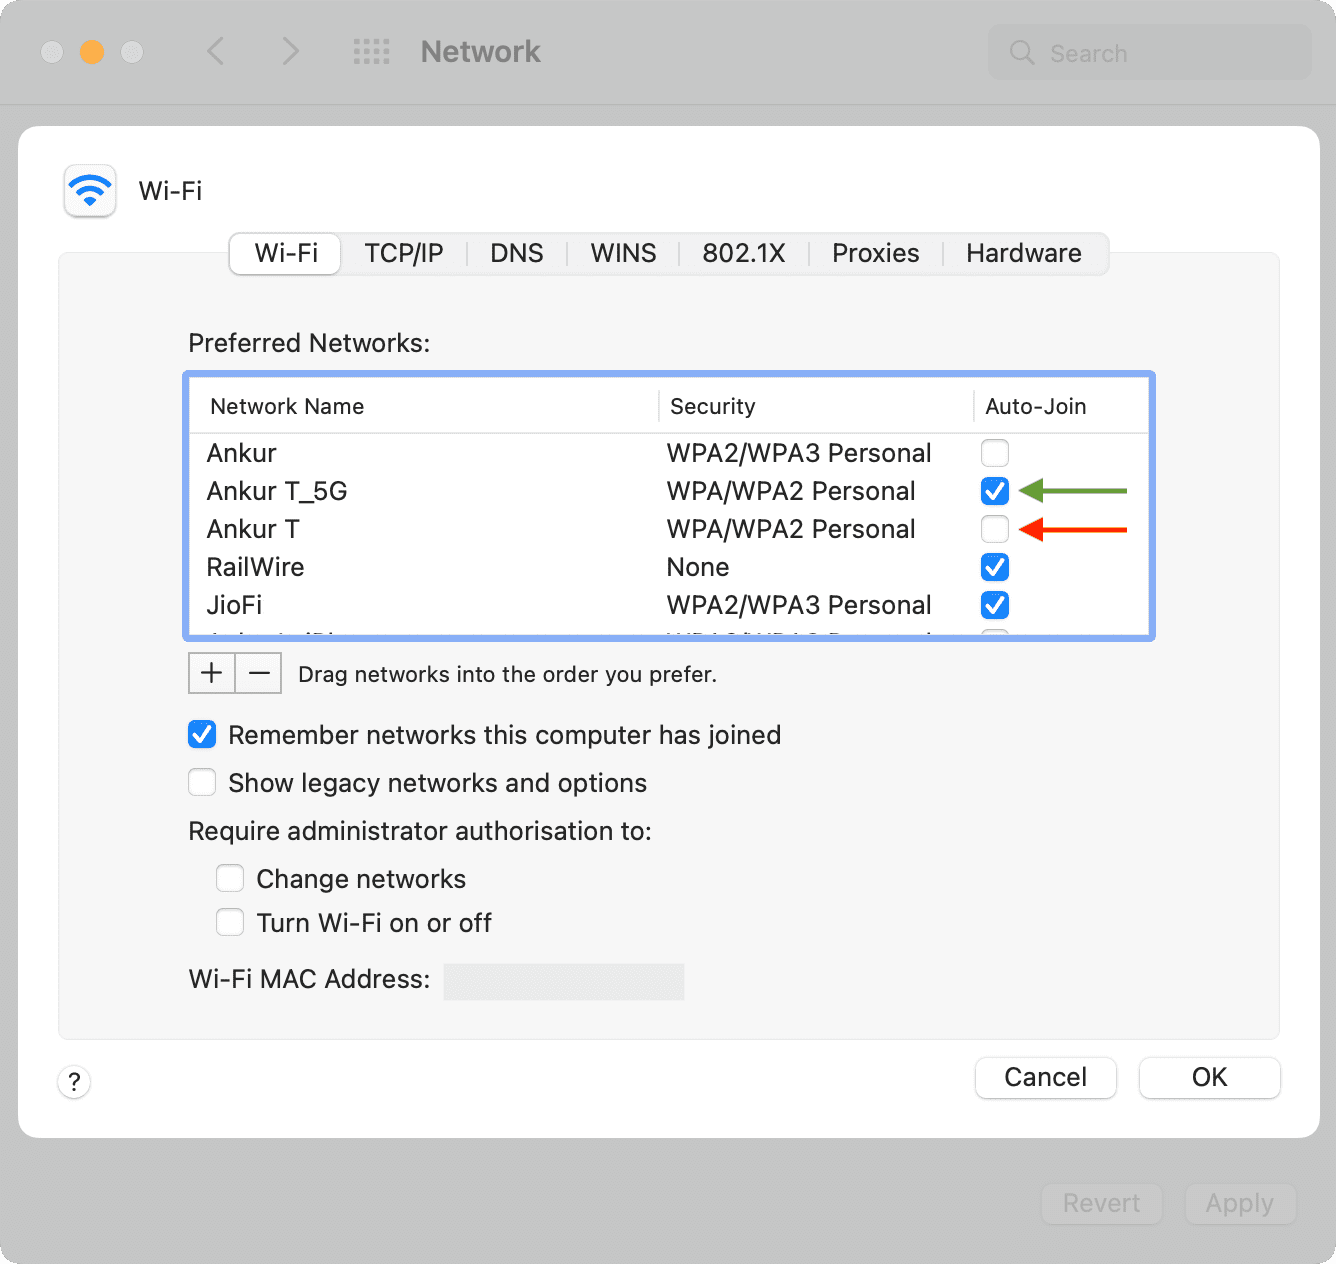 Customize Wi-Fi Auto-Join settings on Mac to prefer faster Wi-Fi network to slower one